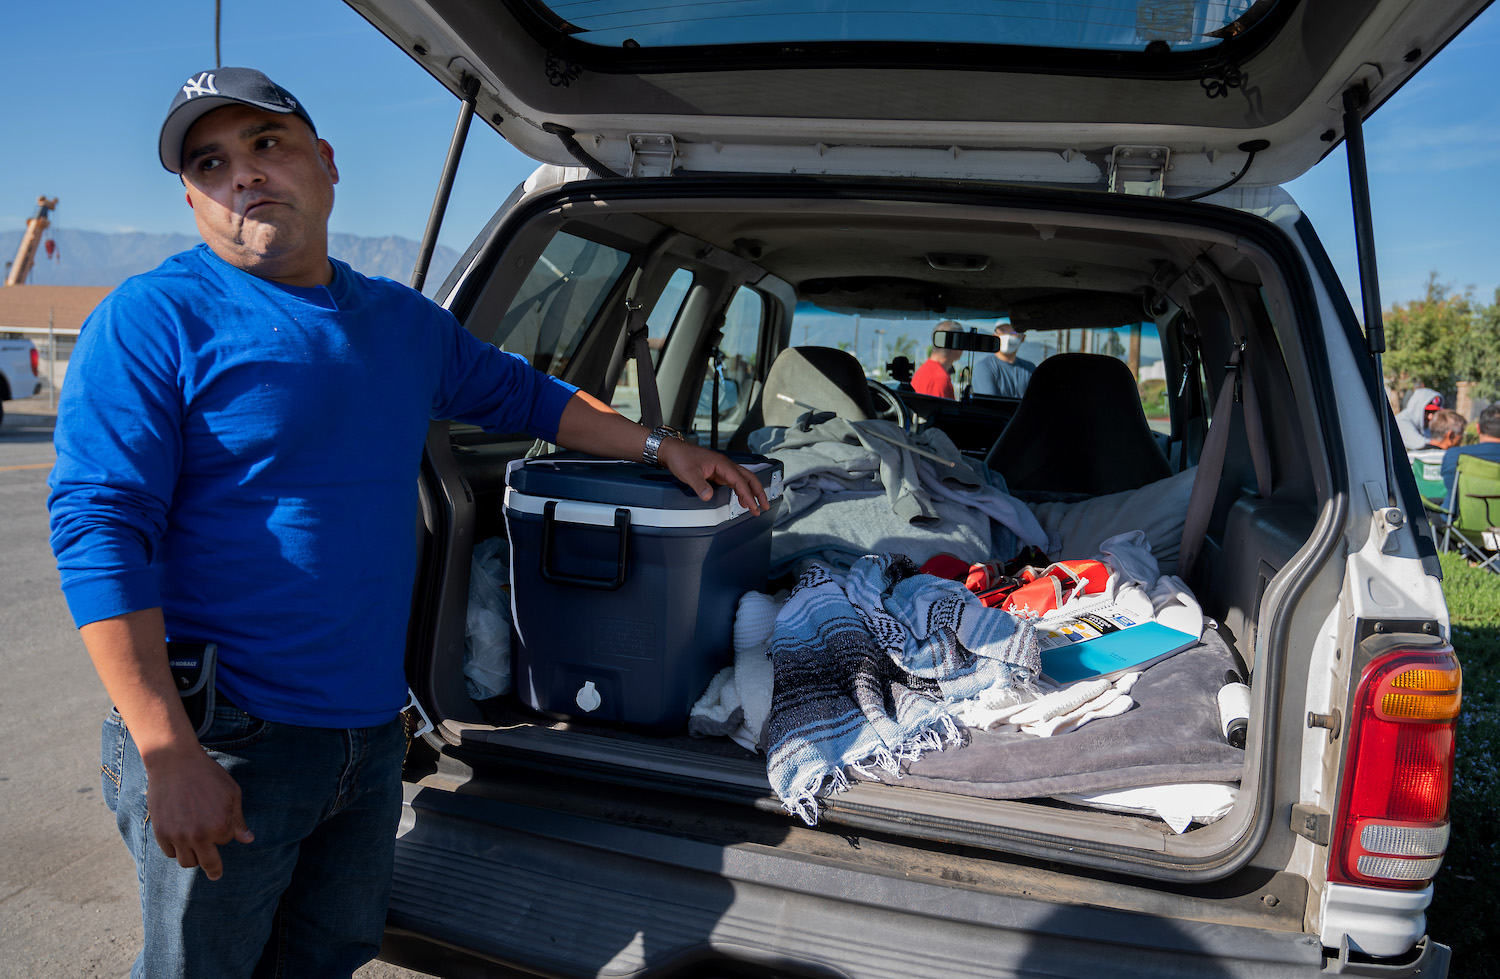 This is a man living in his SUV full time | Terry Pierson/The Press-Enterprise via Getty Images